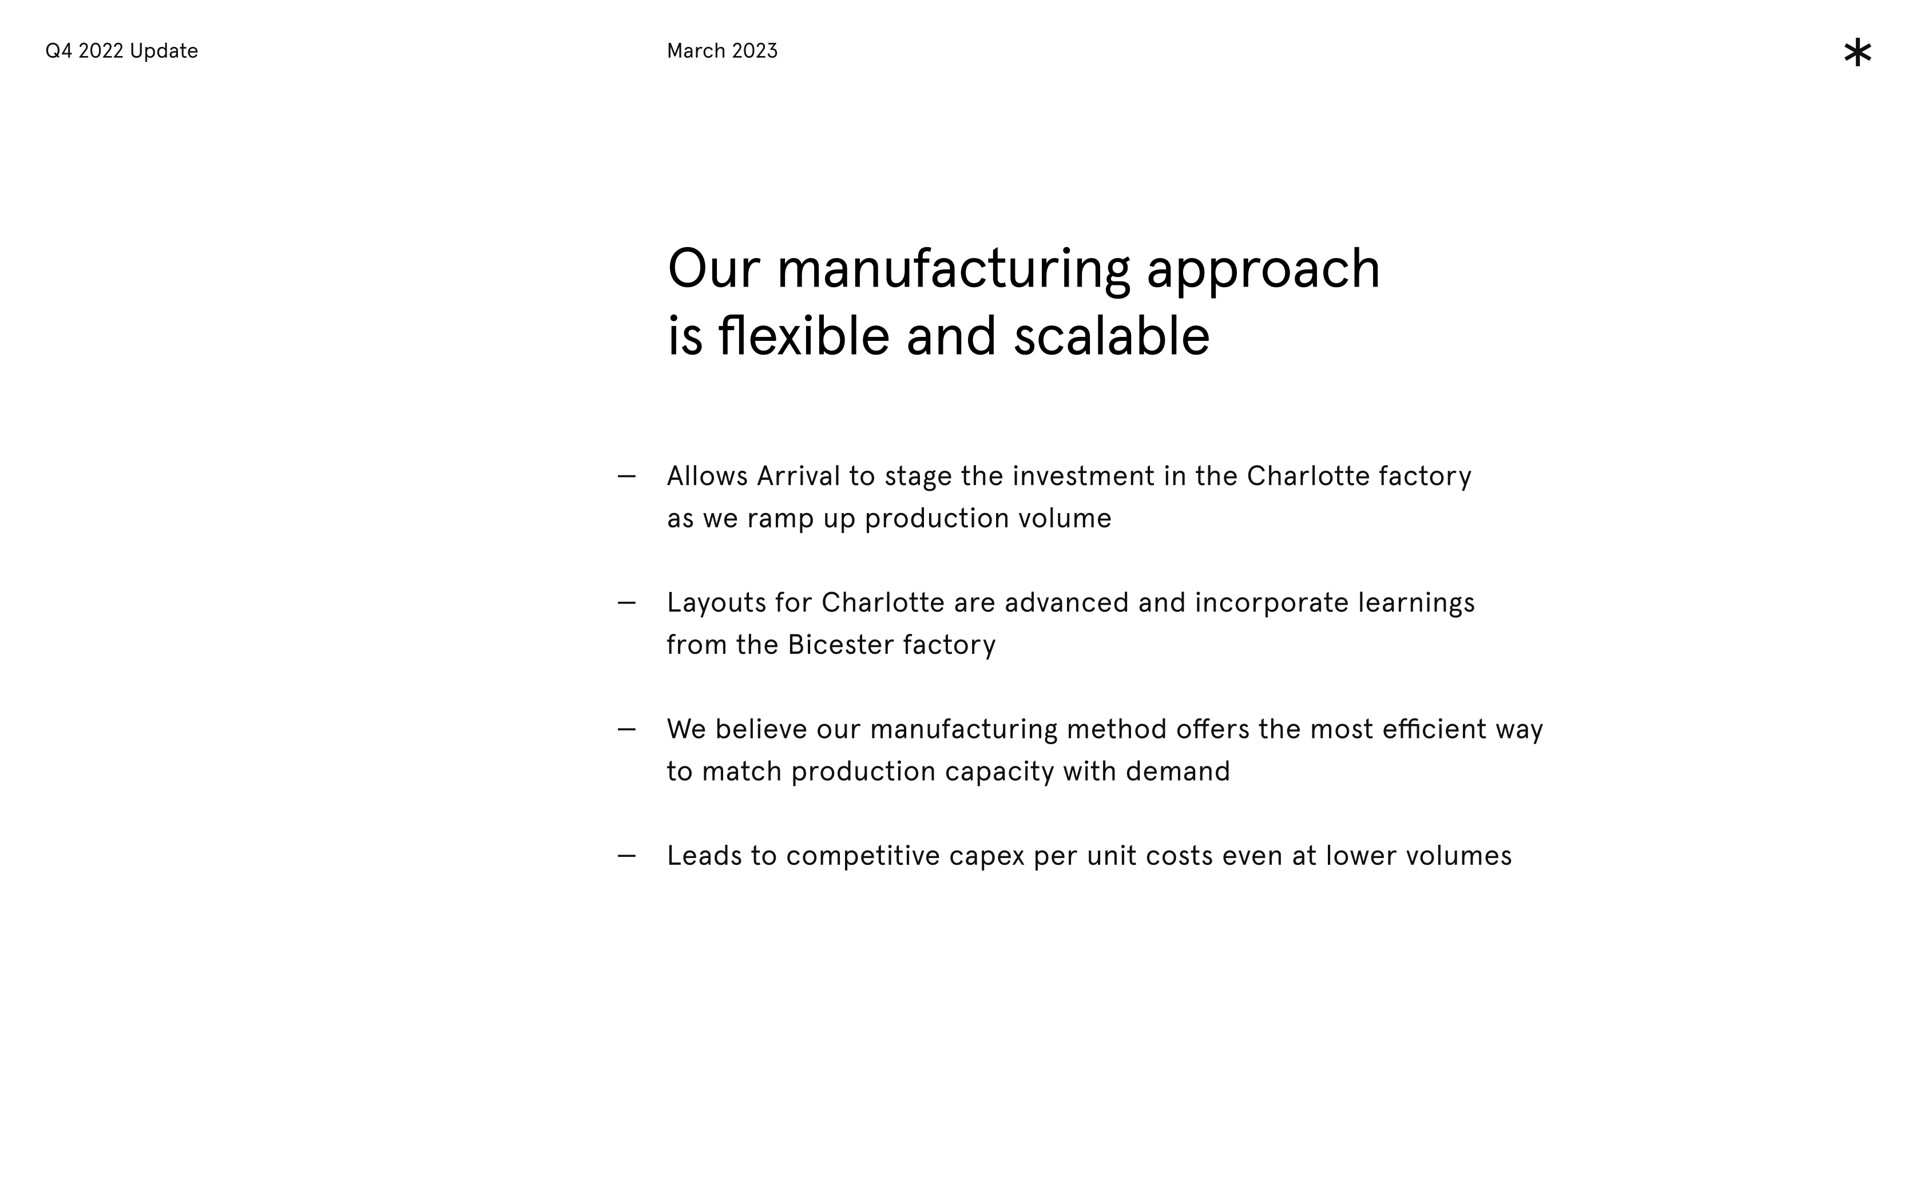 our manufacturing approach is flexible and scalable allows arrival to stage the investment in the factory as we ramp up production volume layouts for are advanced and incorporate learnings from the factory we believe our manufacturing method offers the most efficient way to match production capacity with demand leads to competitive per unit costs even at lower volumes | Arrival